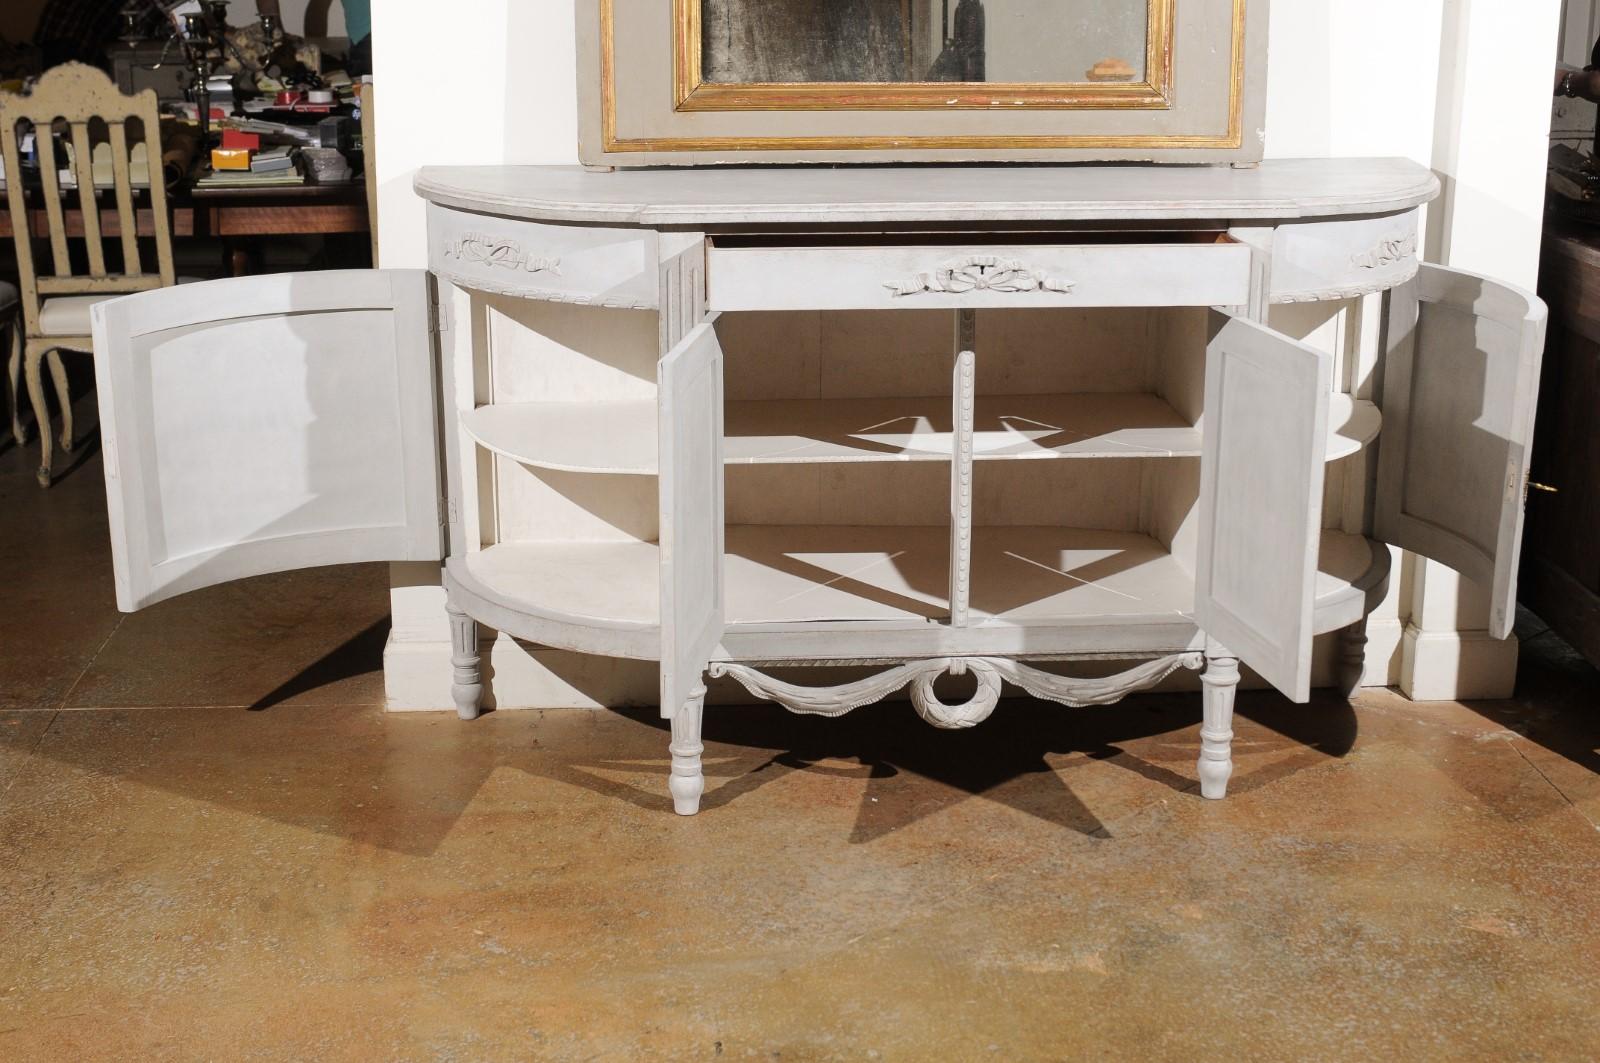 Swedish Gustavian Style Painted Wood Demilune Sideboard with Swags and Ribbons (20. Jahrhundert)